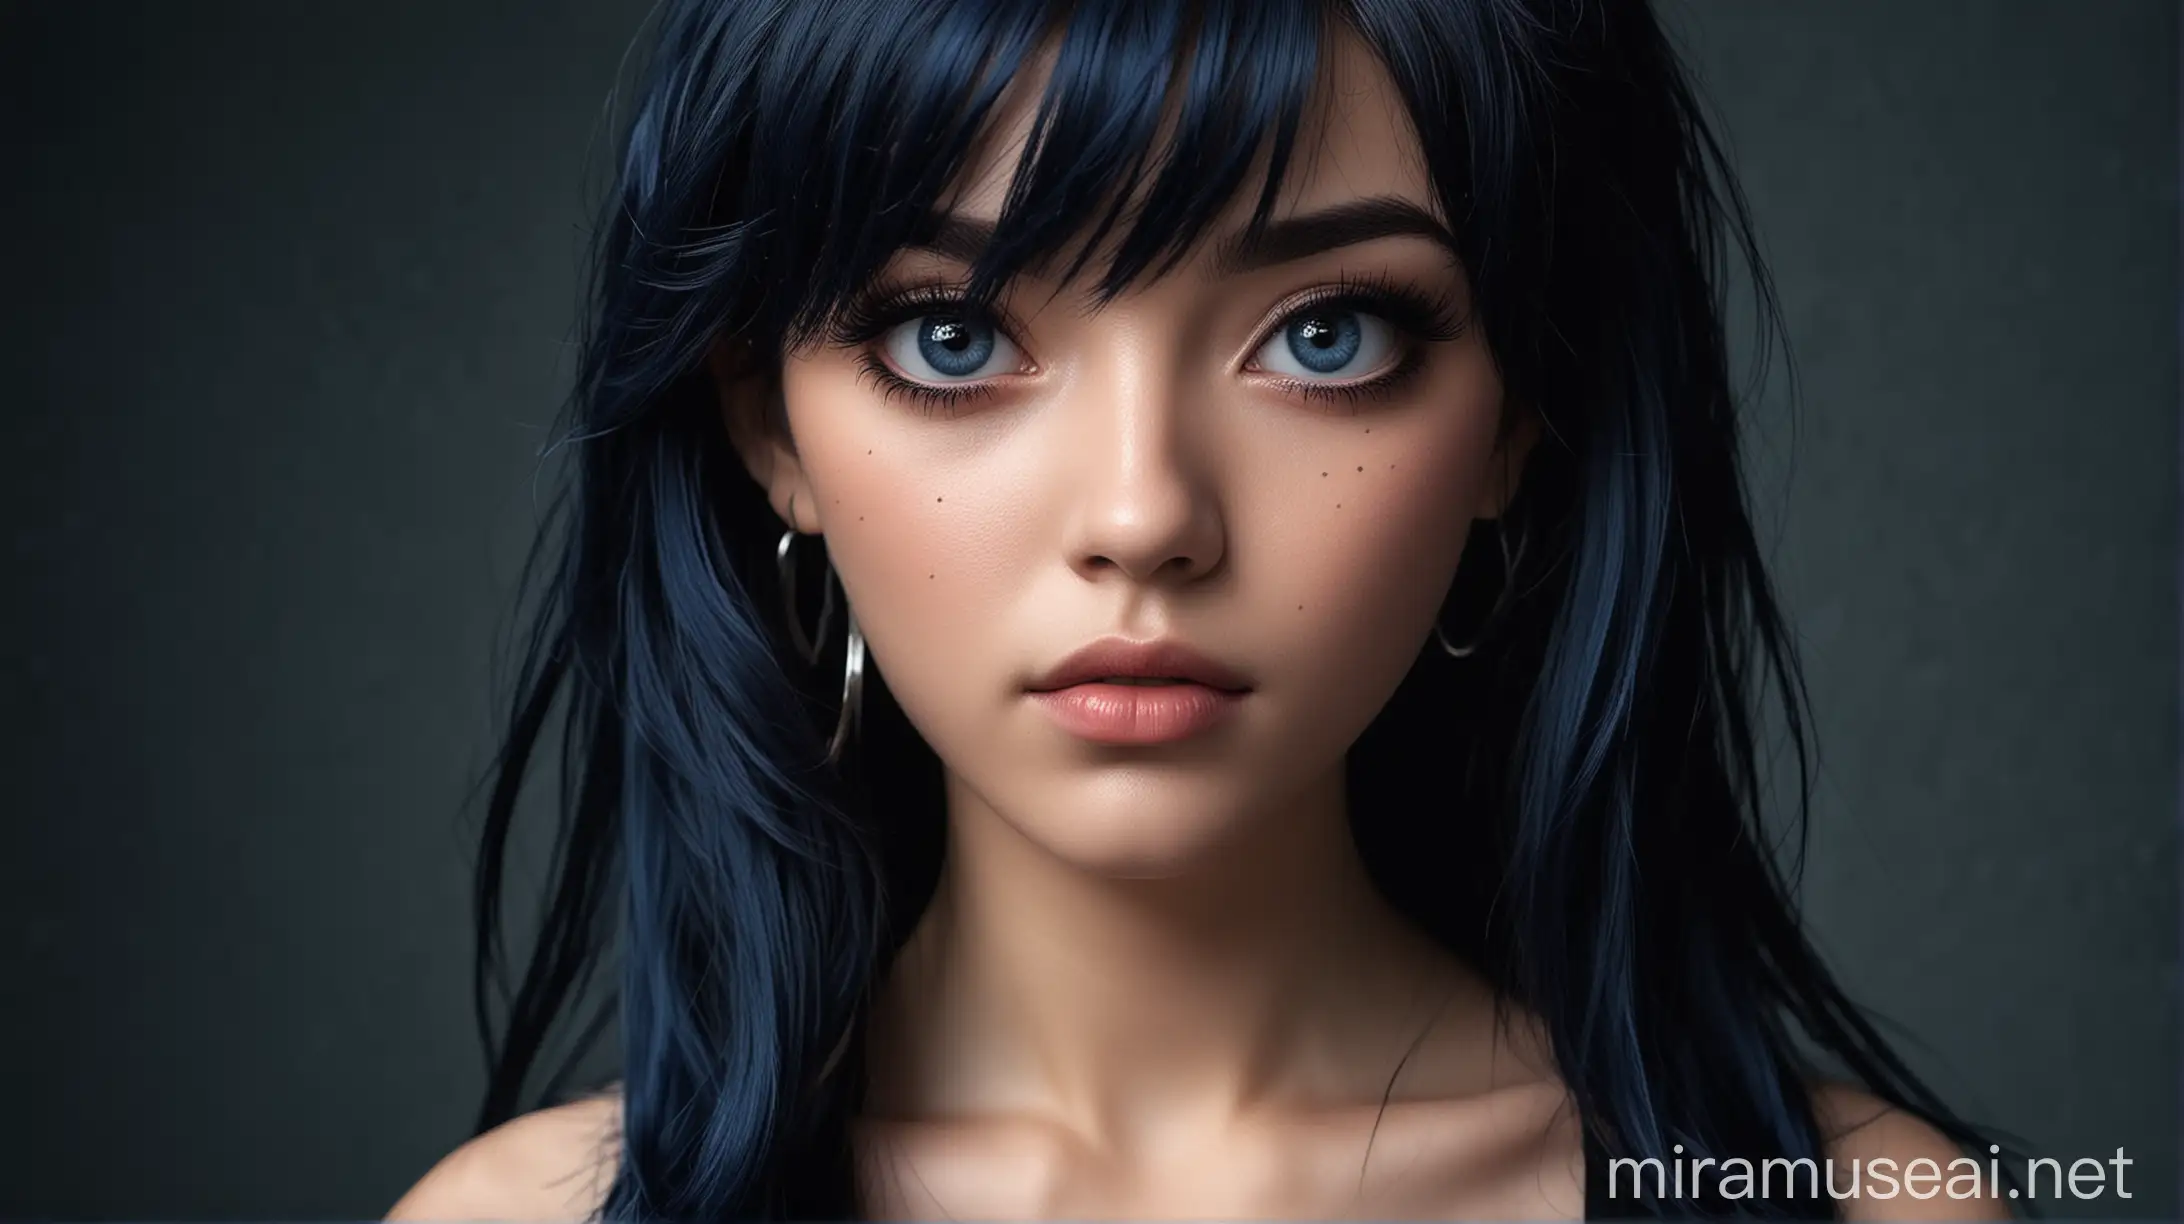 Mysterious Girls with Black Eyes and Dark Blue Hair Ethereal iPhone XS Max Wallpapers